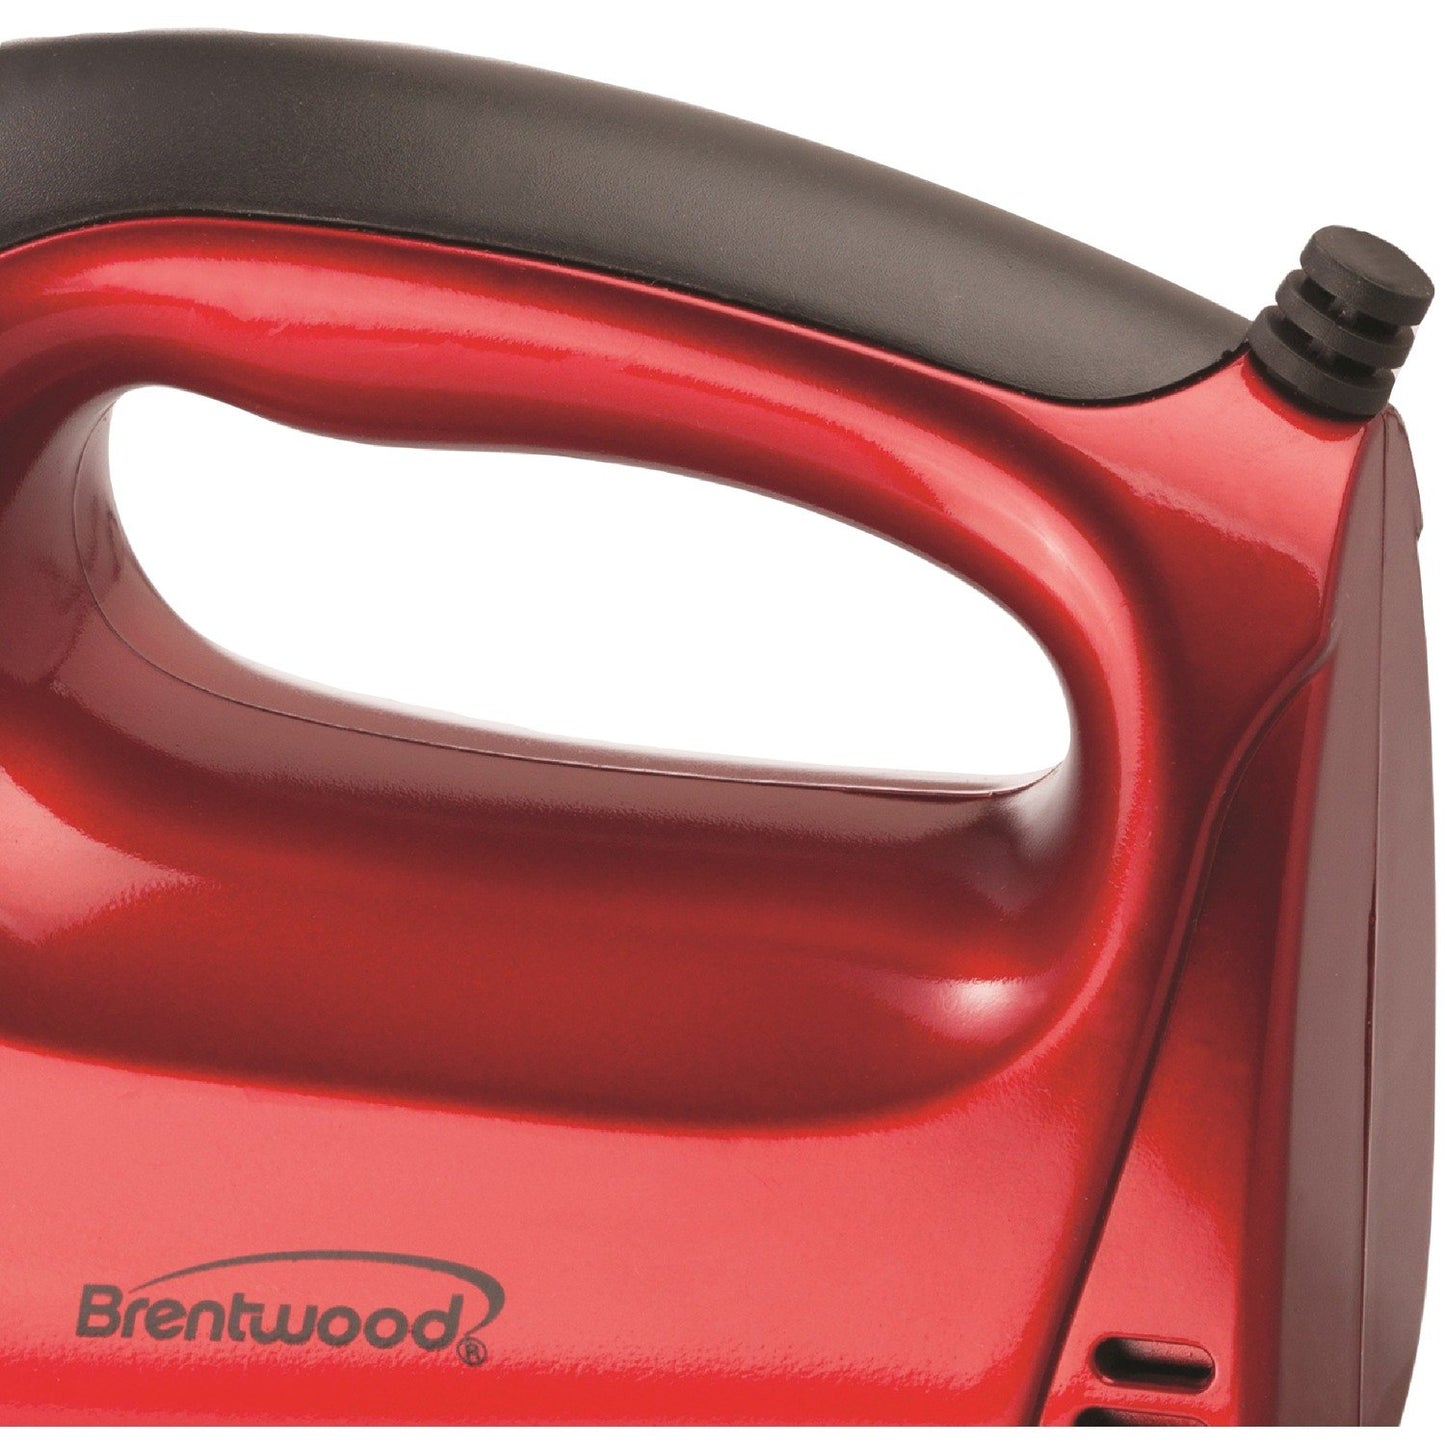 Brentwood Appliances HM46 5-Speed Electric Hand Mixer (Red)